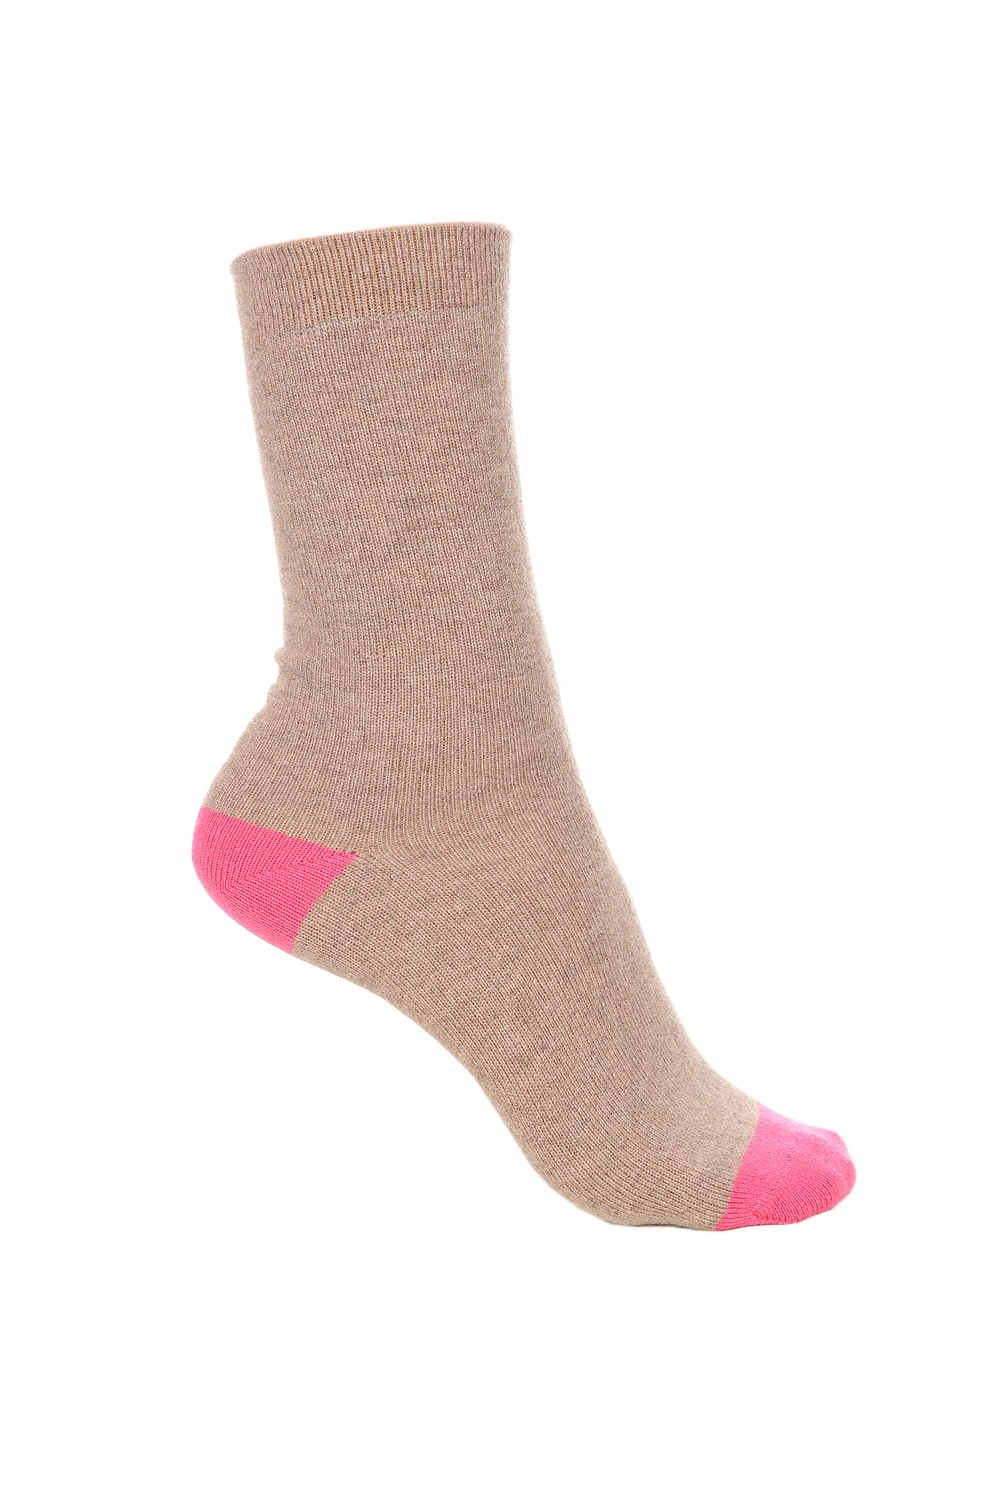 Cachemire & Elasthanne accessoires chaussettes frontibus natural brown chine rose shocking 35 38